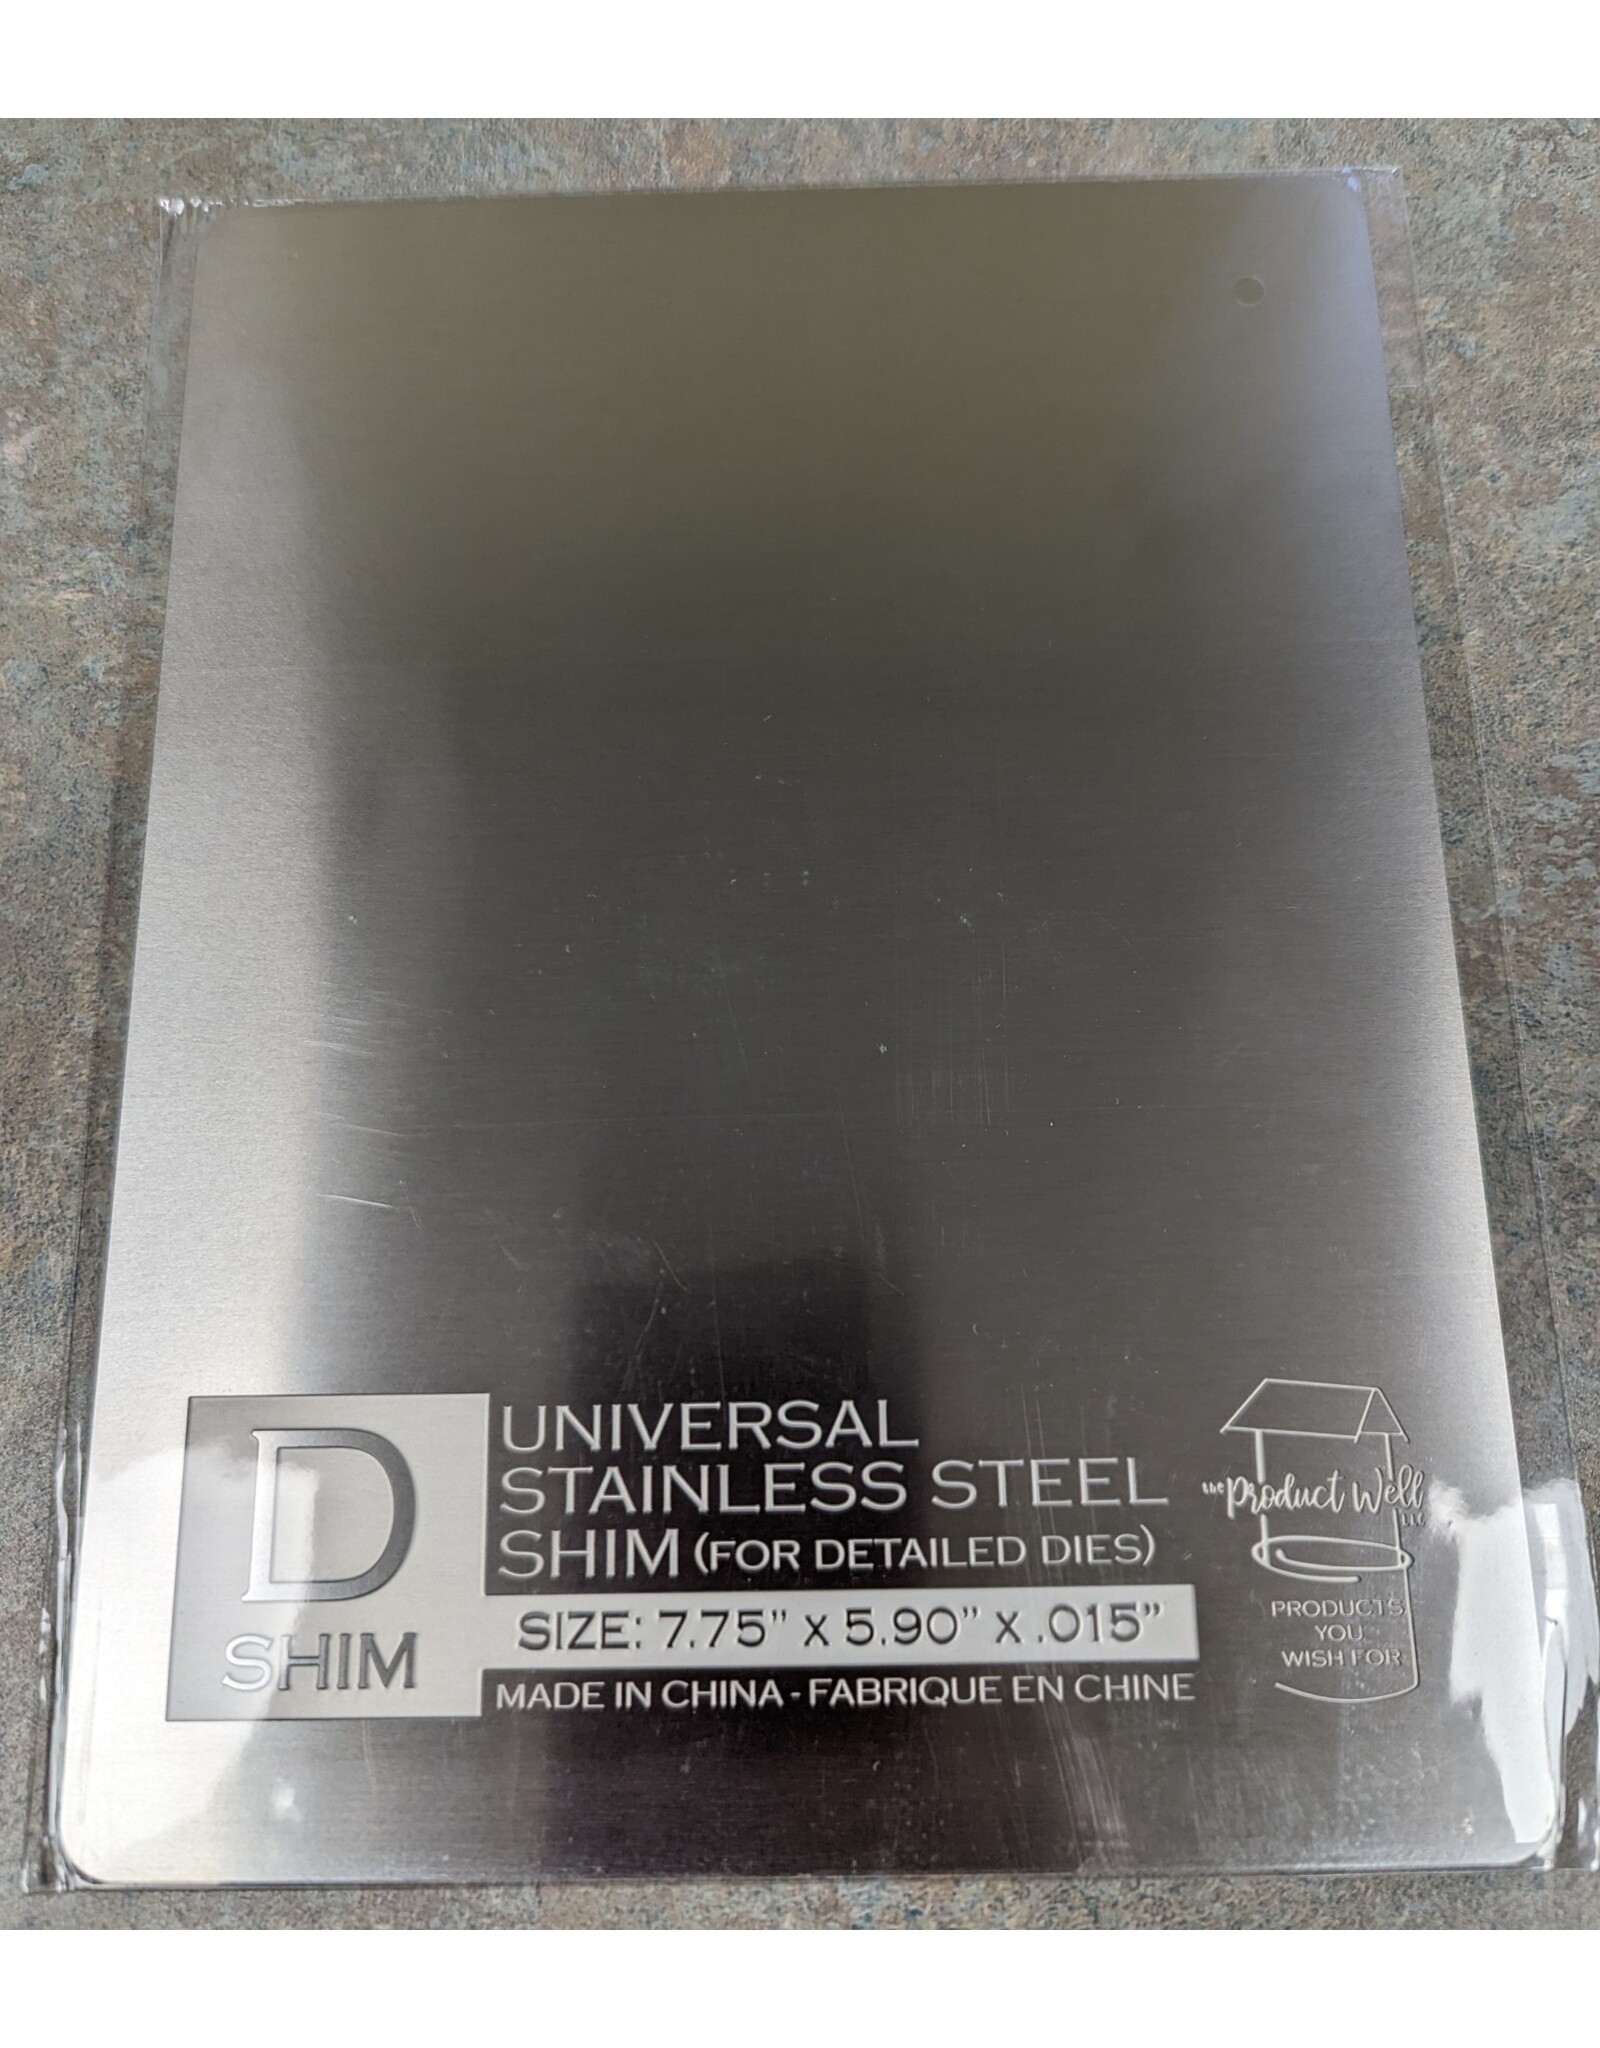 THE PRODUCT WELL Universal D Shim - Metal for Detailed Dies 7.75" x 5.90" x .015"